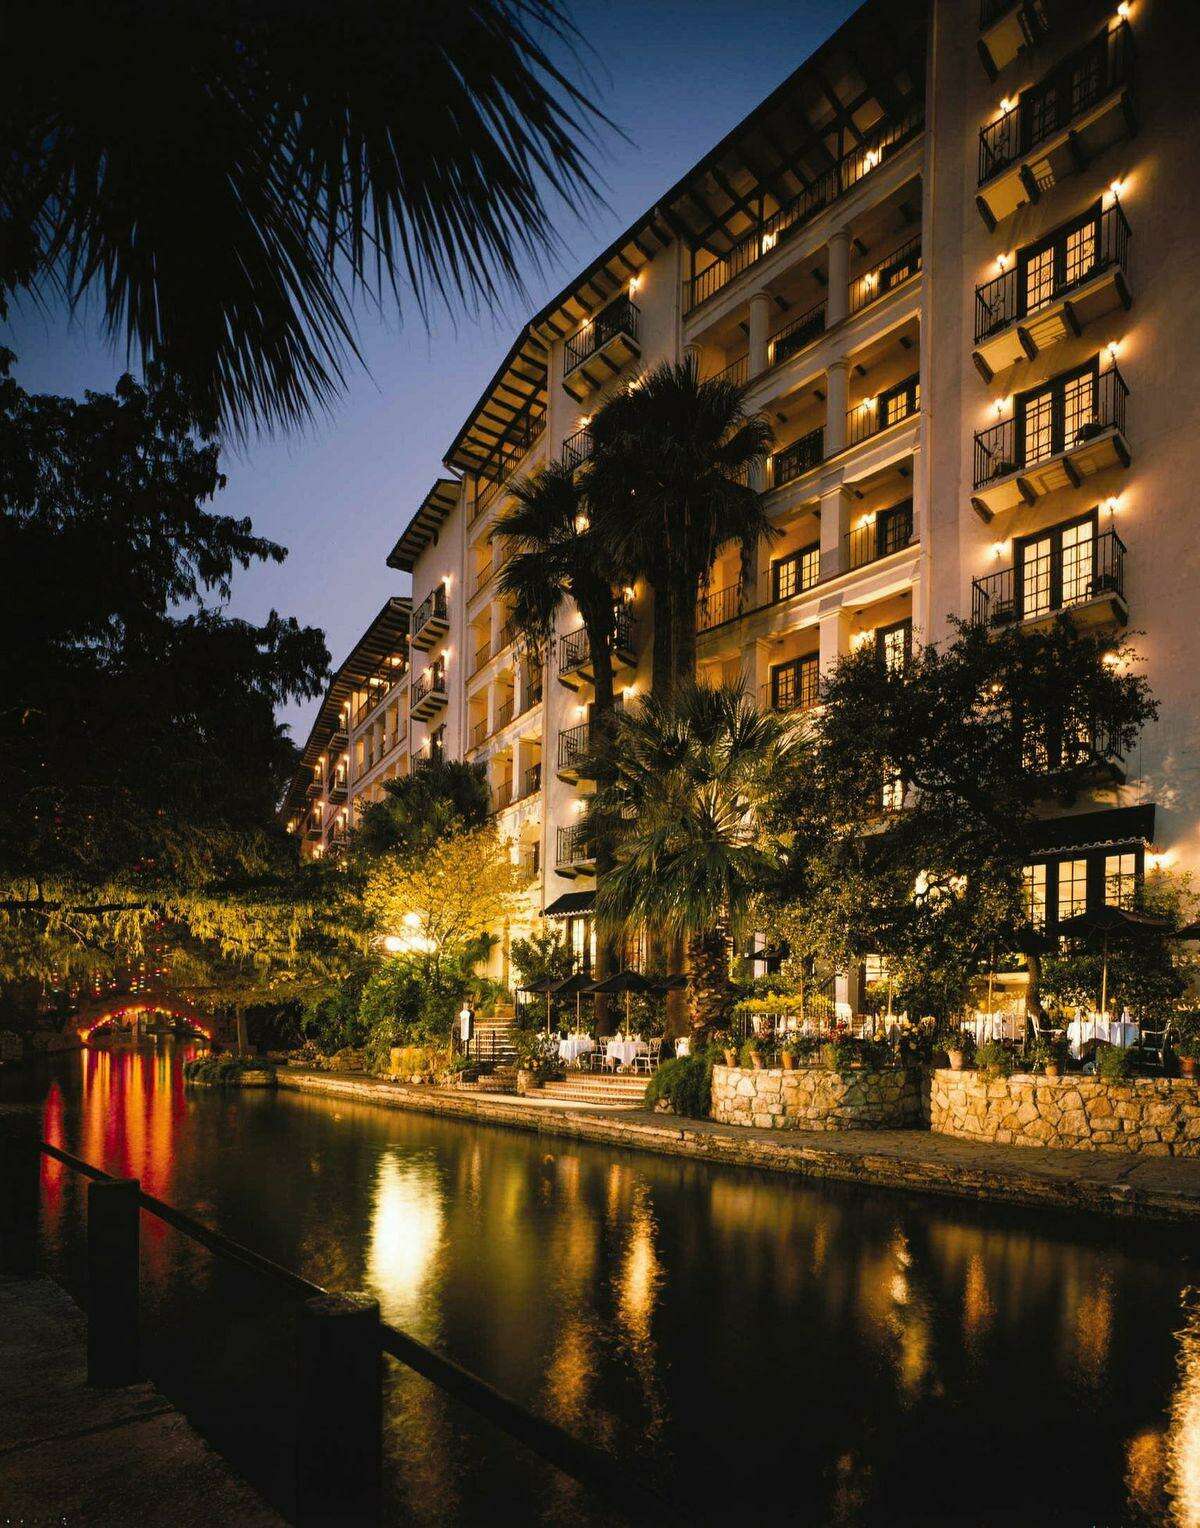 The Omni La Mansión Del Rio on San Antonio’s River Walk and two affiliated companies are accused of negligence in a lawsuit that alleges a toddler was struck in the head by a ketchup bottle that fell from a fifth-floor balcony in 2018.